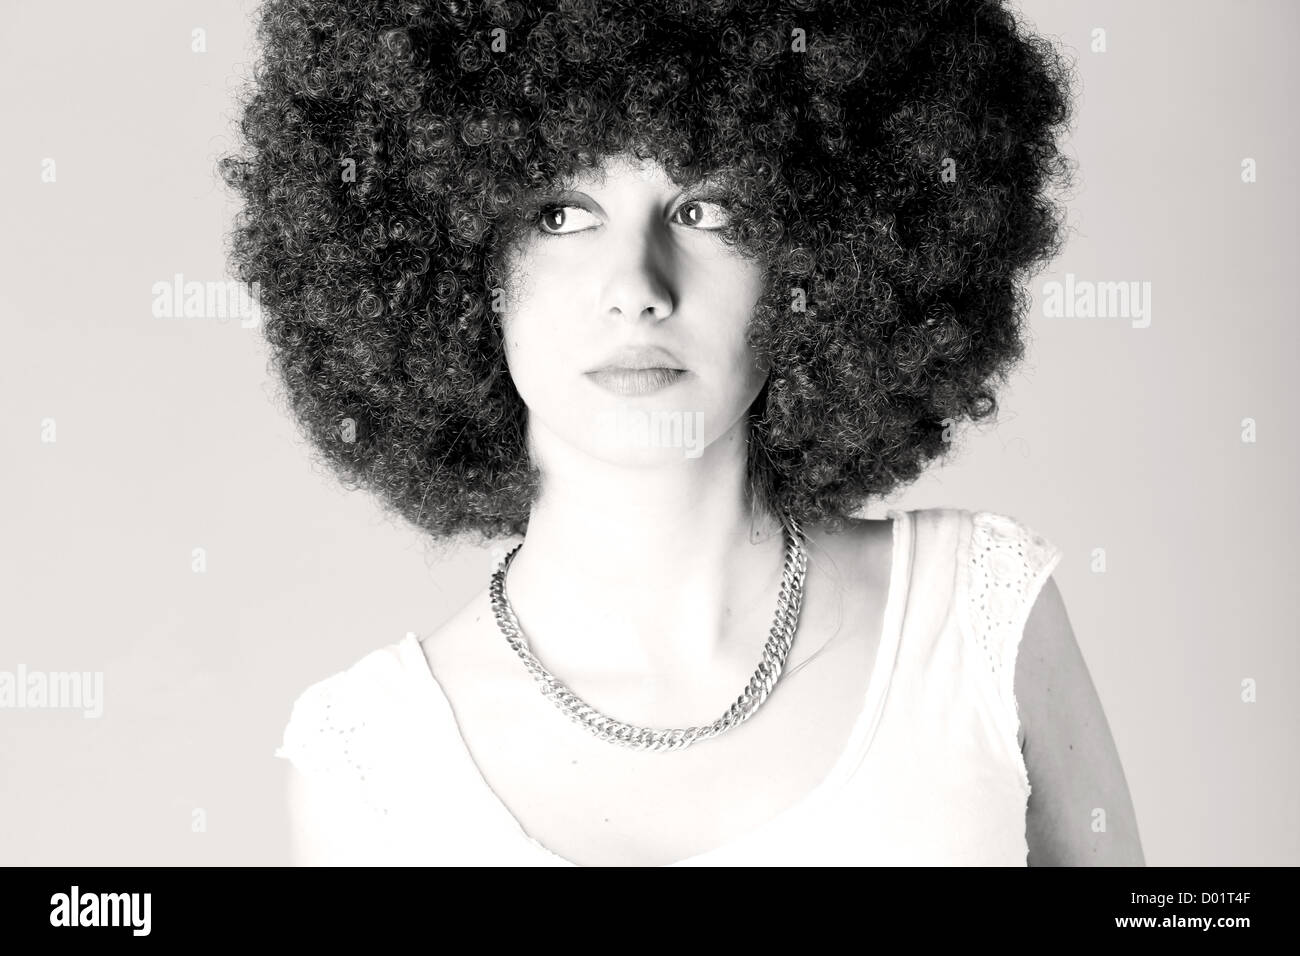 Young woman wearing an afro wig against gray background Stock Photo